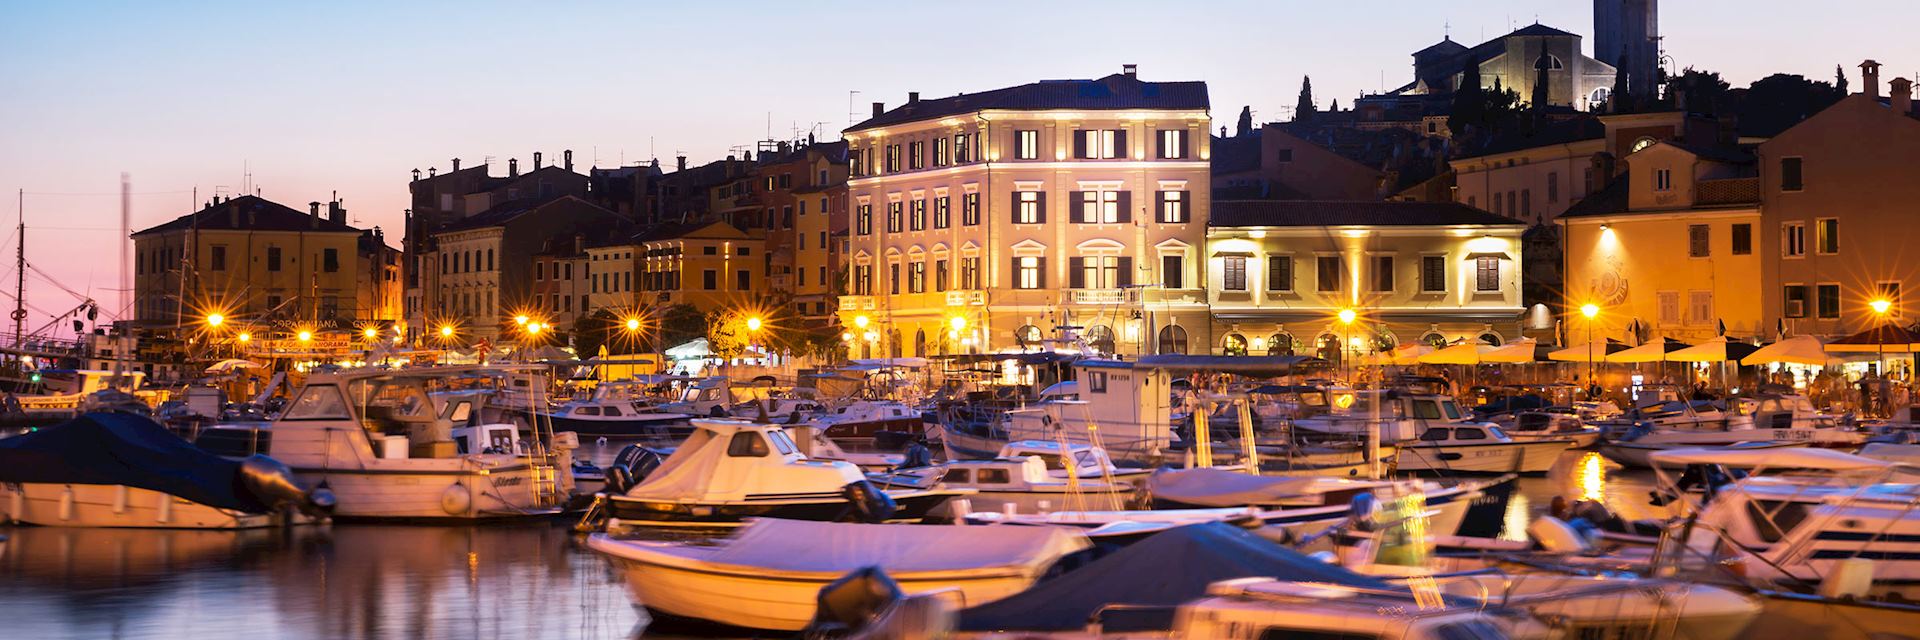 Hotel Adriatic Hotels In Rovinj Audley Travel